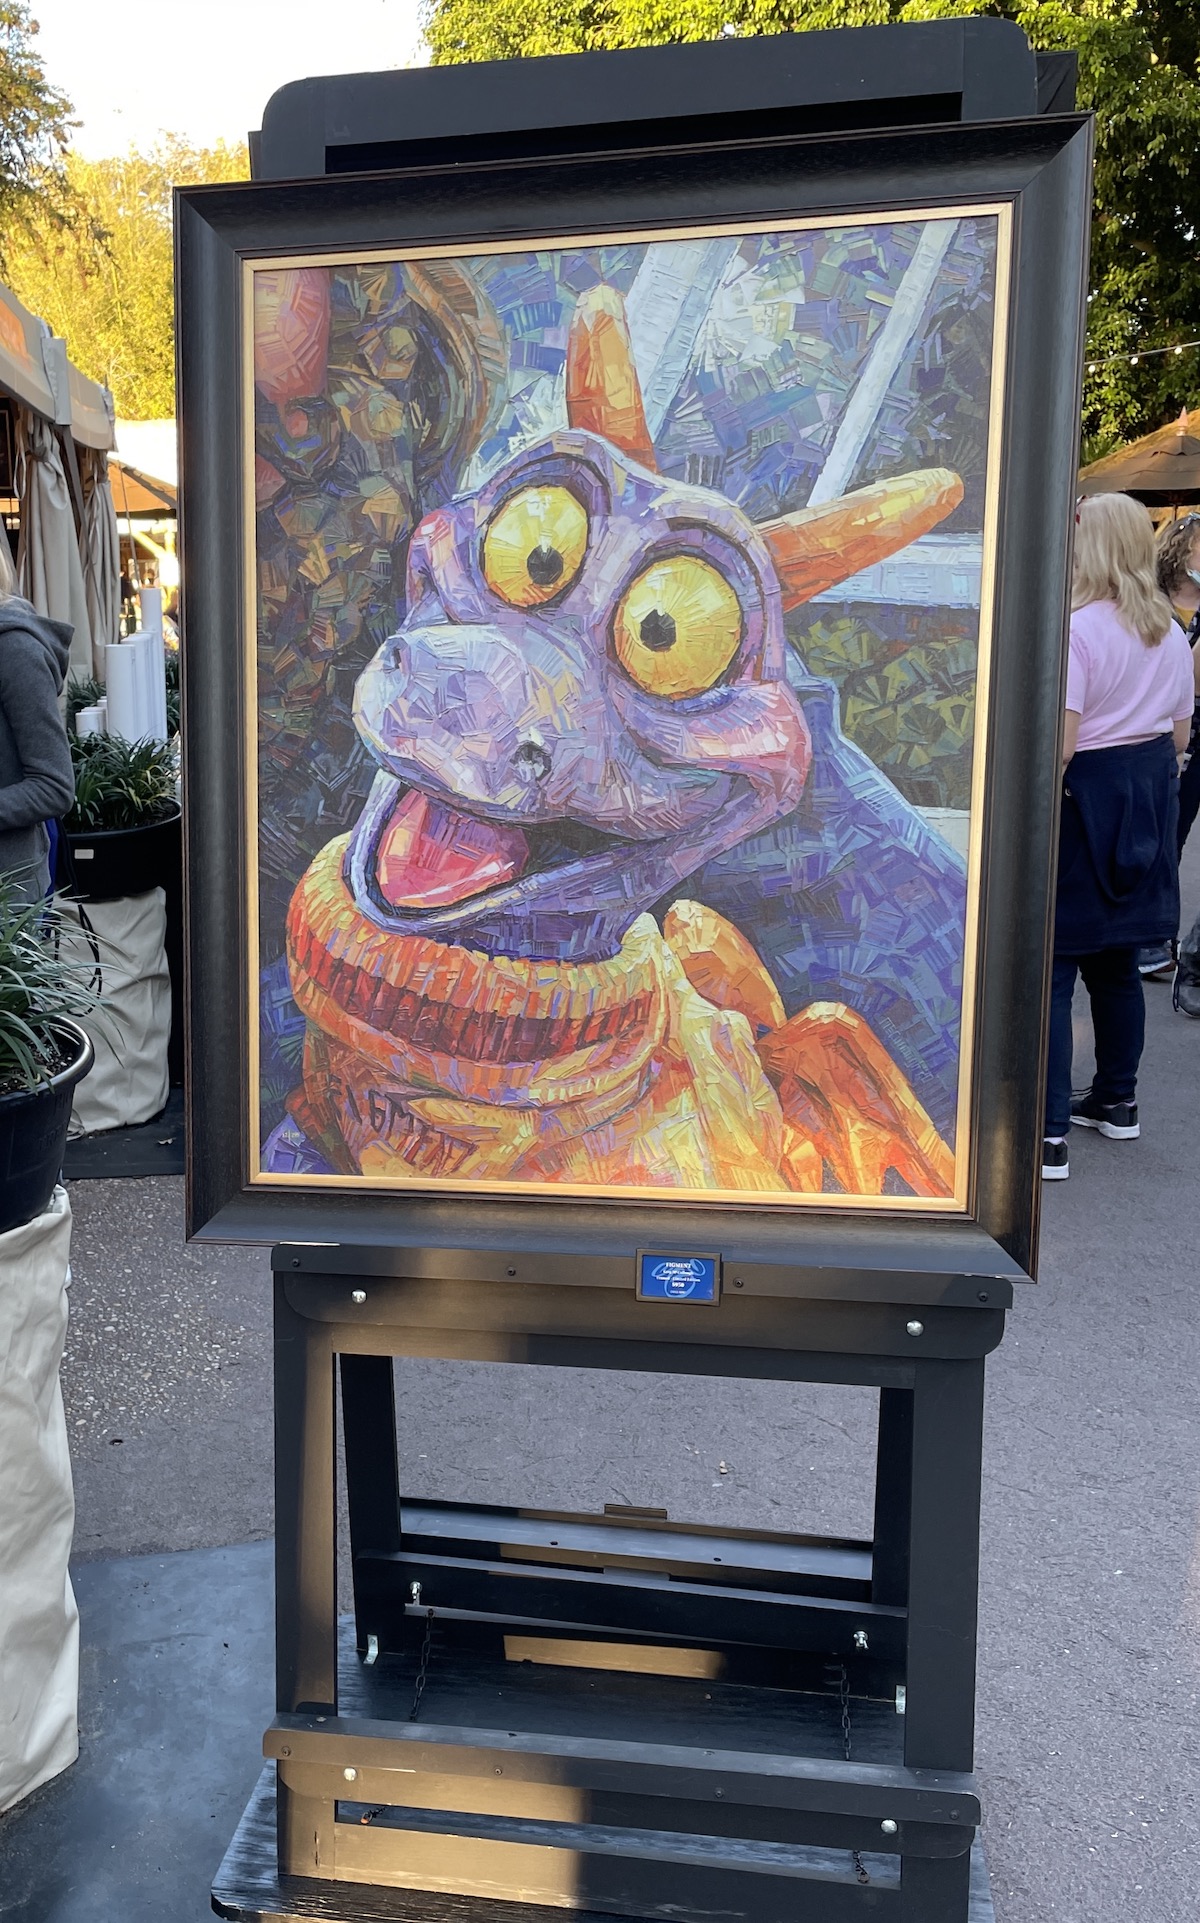 Painting of Figment at Epcot Festival of the Arts 2022.